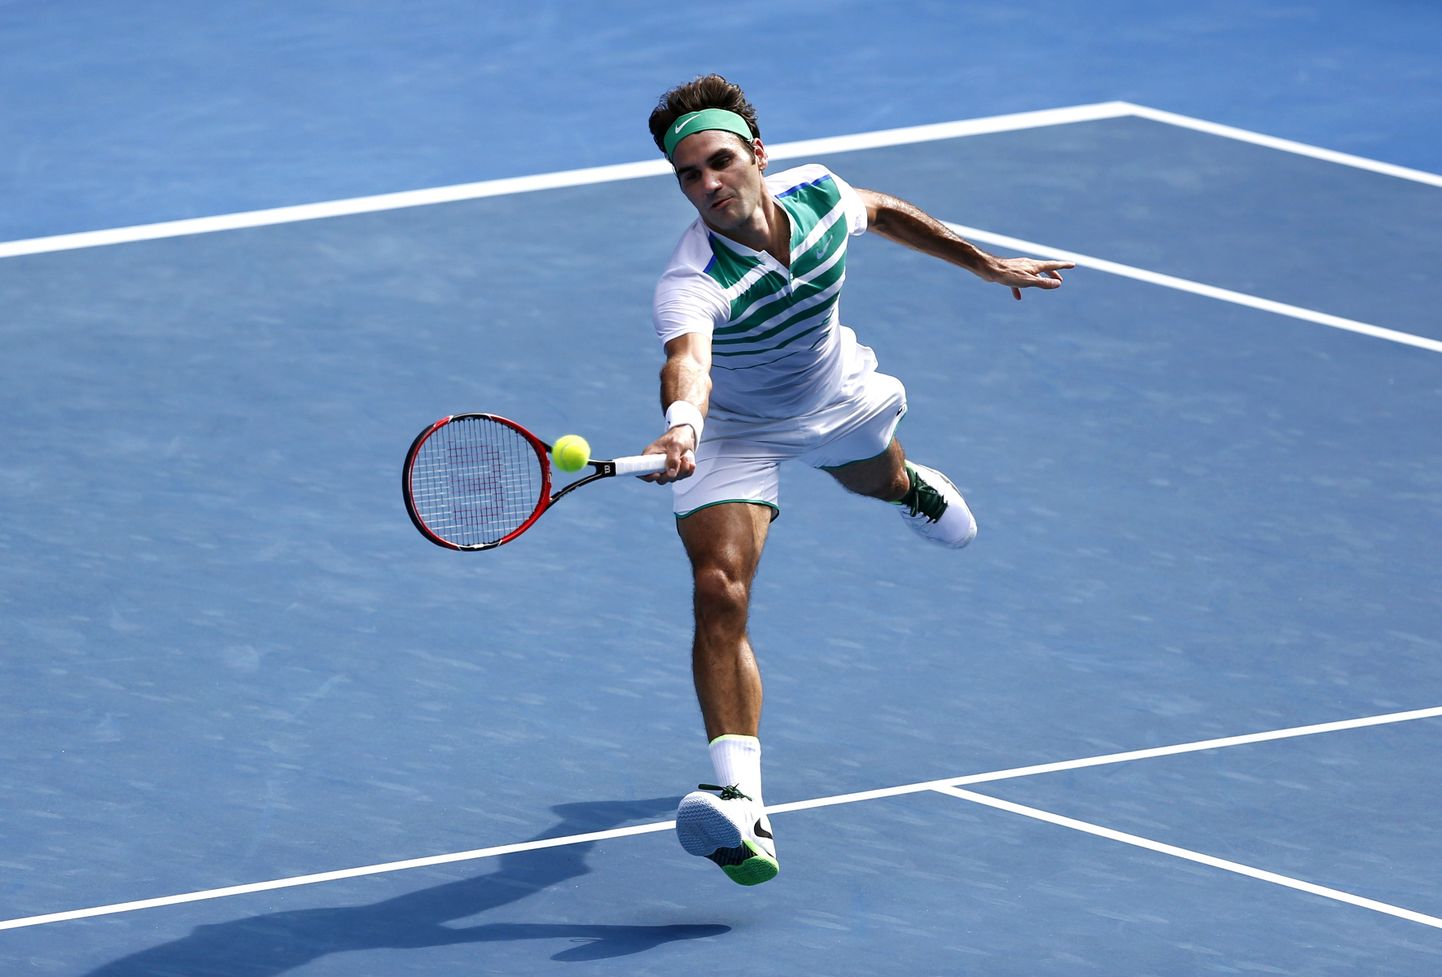 Roger Federer of Switzerland plays a forehand return to Tomas Berdych of the Czech Republic during their quarterfinal match at the Australian Open tennis championships in Melbourne, Australia, Tuesday, Jan. 26, 2016.(AP Photo/Rafiq Maqbool)